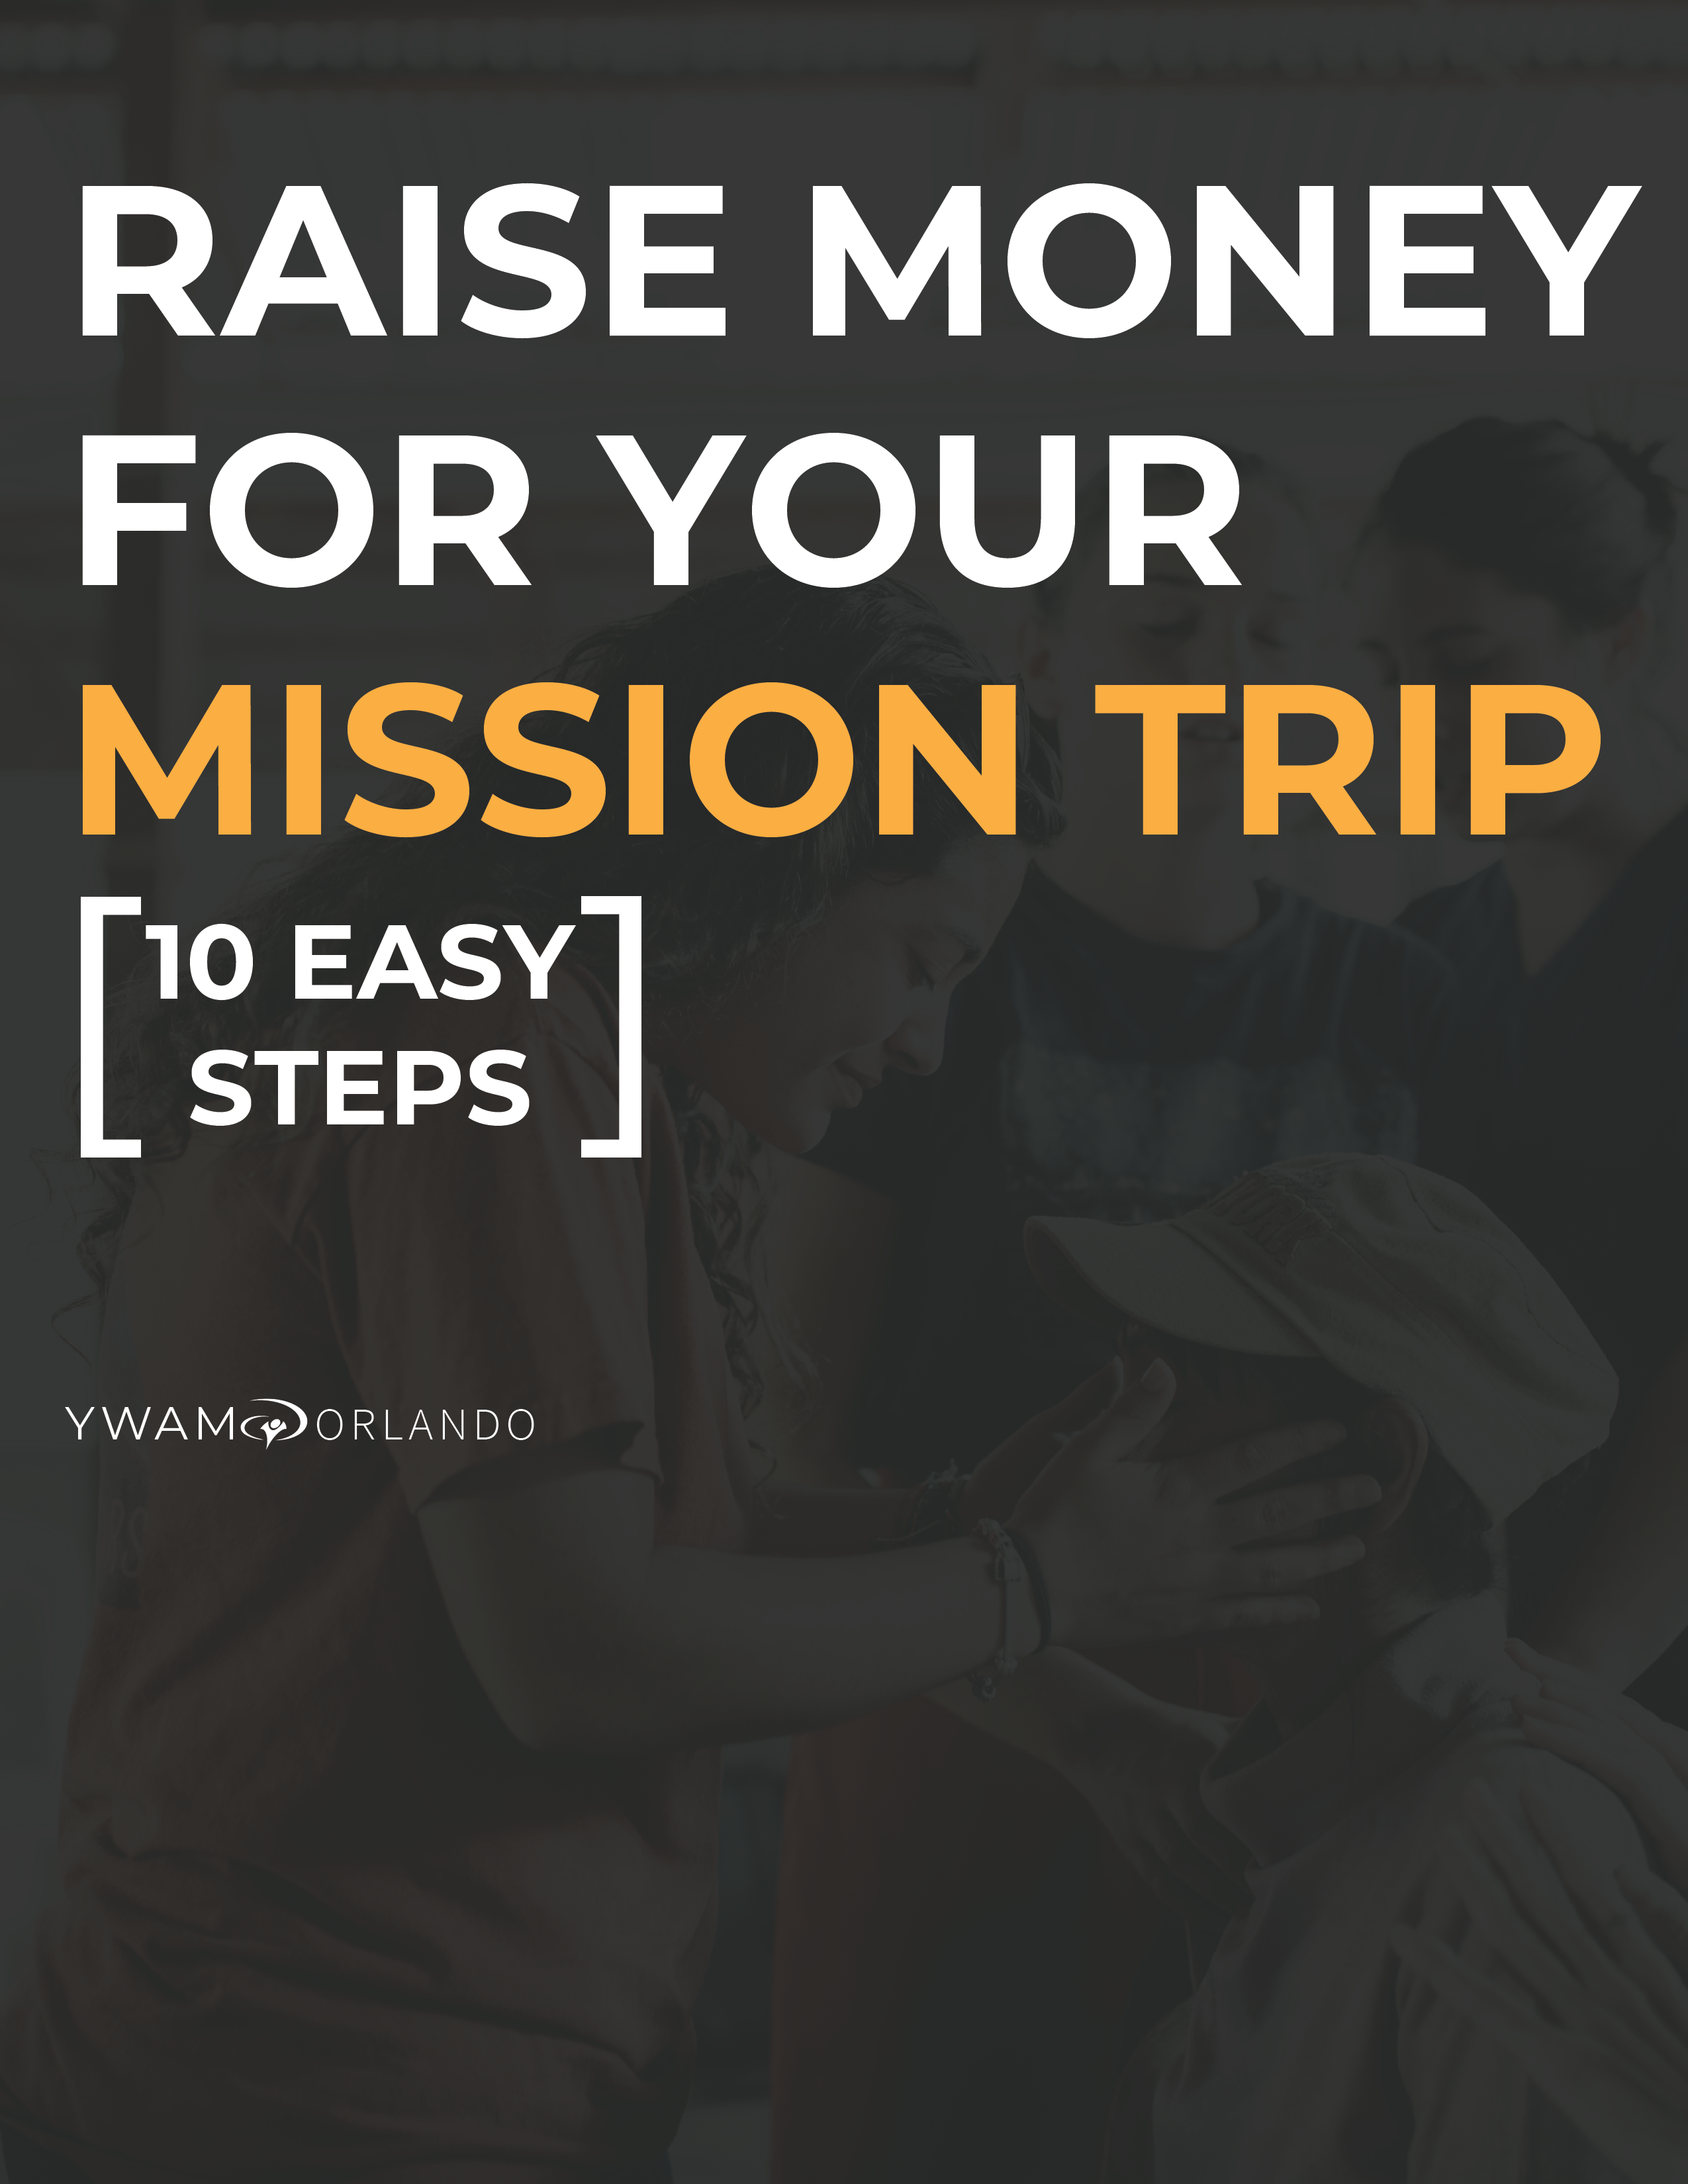 Cover for the eBook Raise Money For Your Mission Trip in 10 Easy Steps.